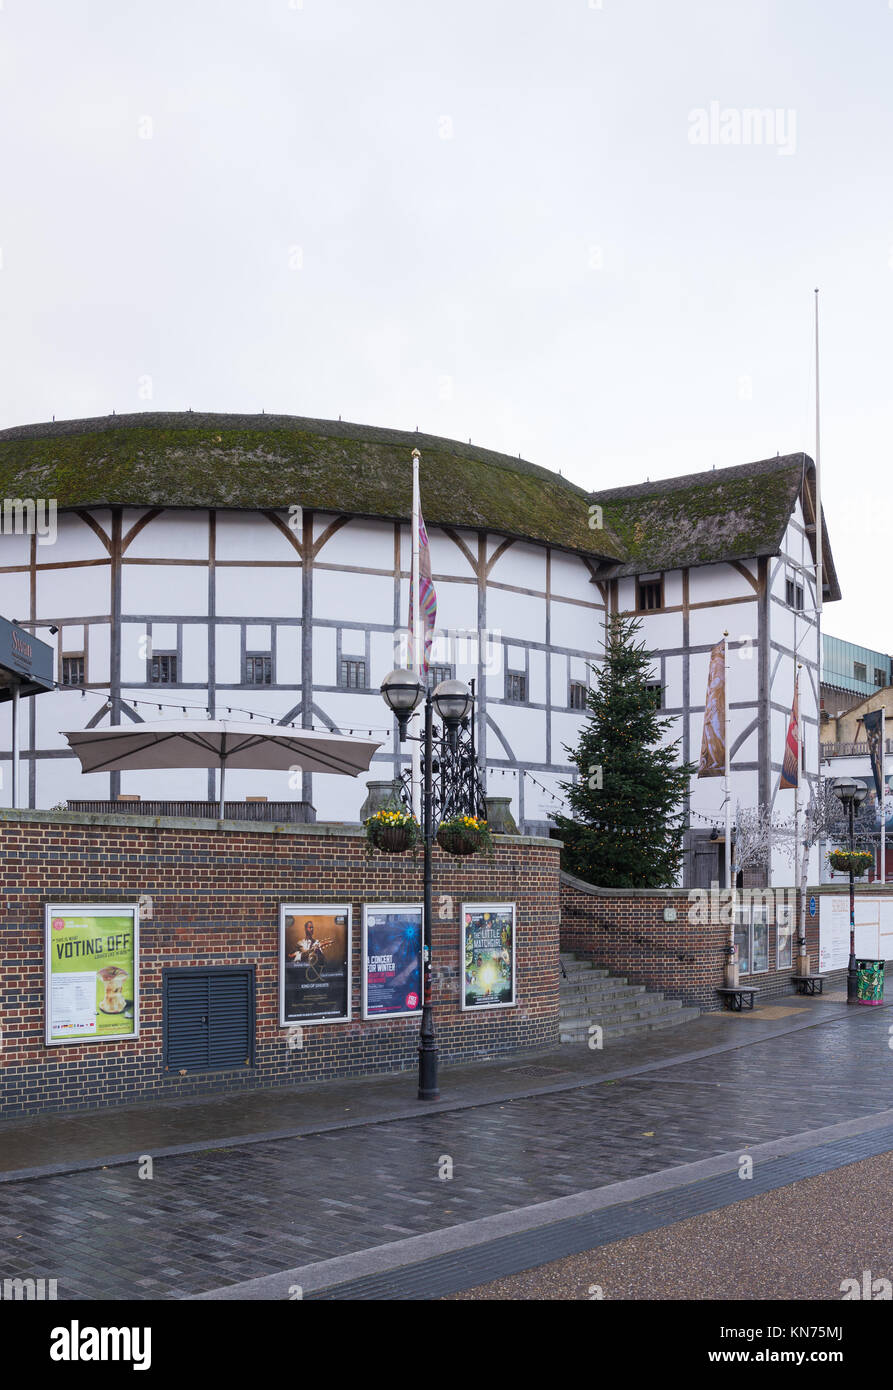 The reconstruction of William Shakespeare's Globe Theatre, situated on the South Bank of the River Thames in the Borough of Southwark, London, England. Stock Photo